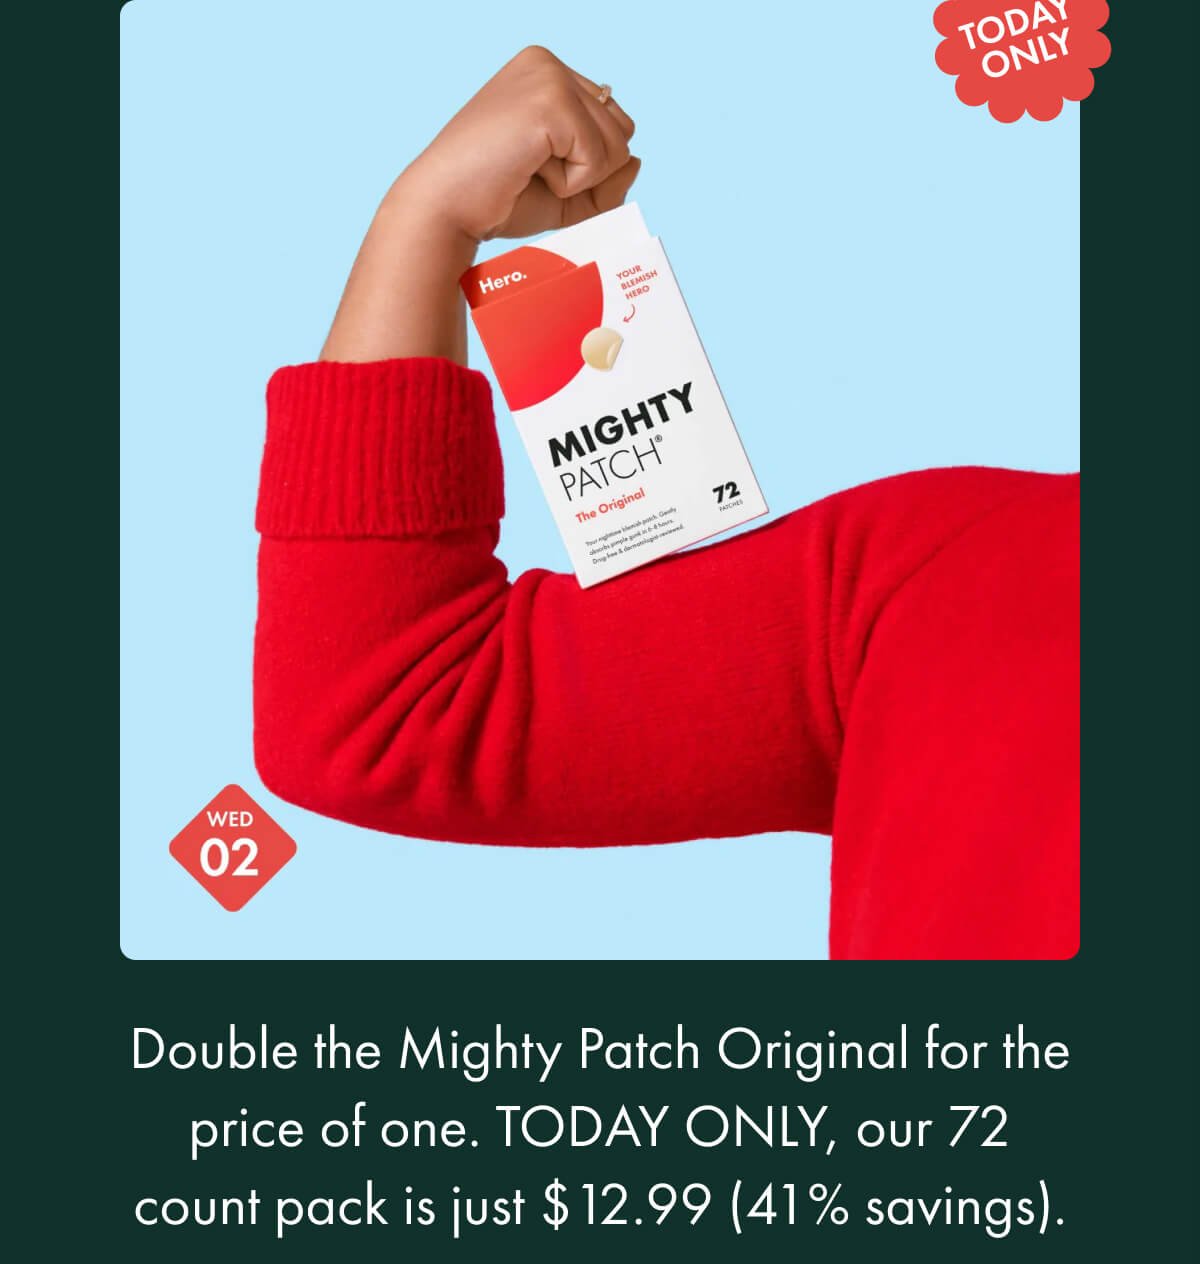 Today only! Wednesday november 2nd. Double the mighty patch original for the price of one. Today only, our 72 count pack is just $12.99 (41% savings).mighty patch original sitting on a girls' arm 